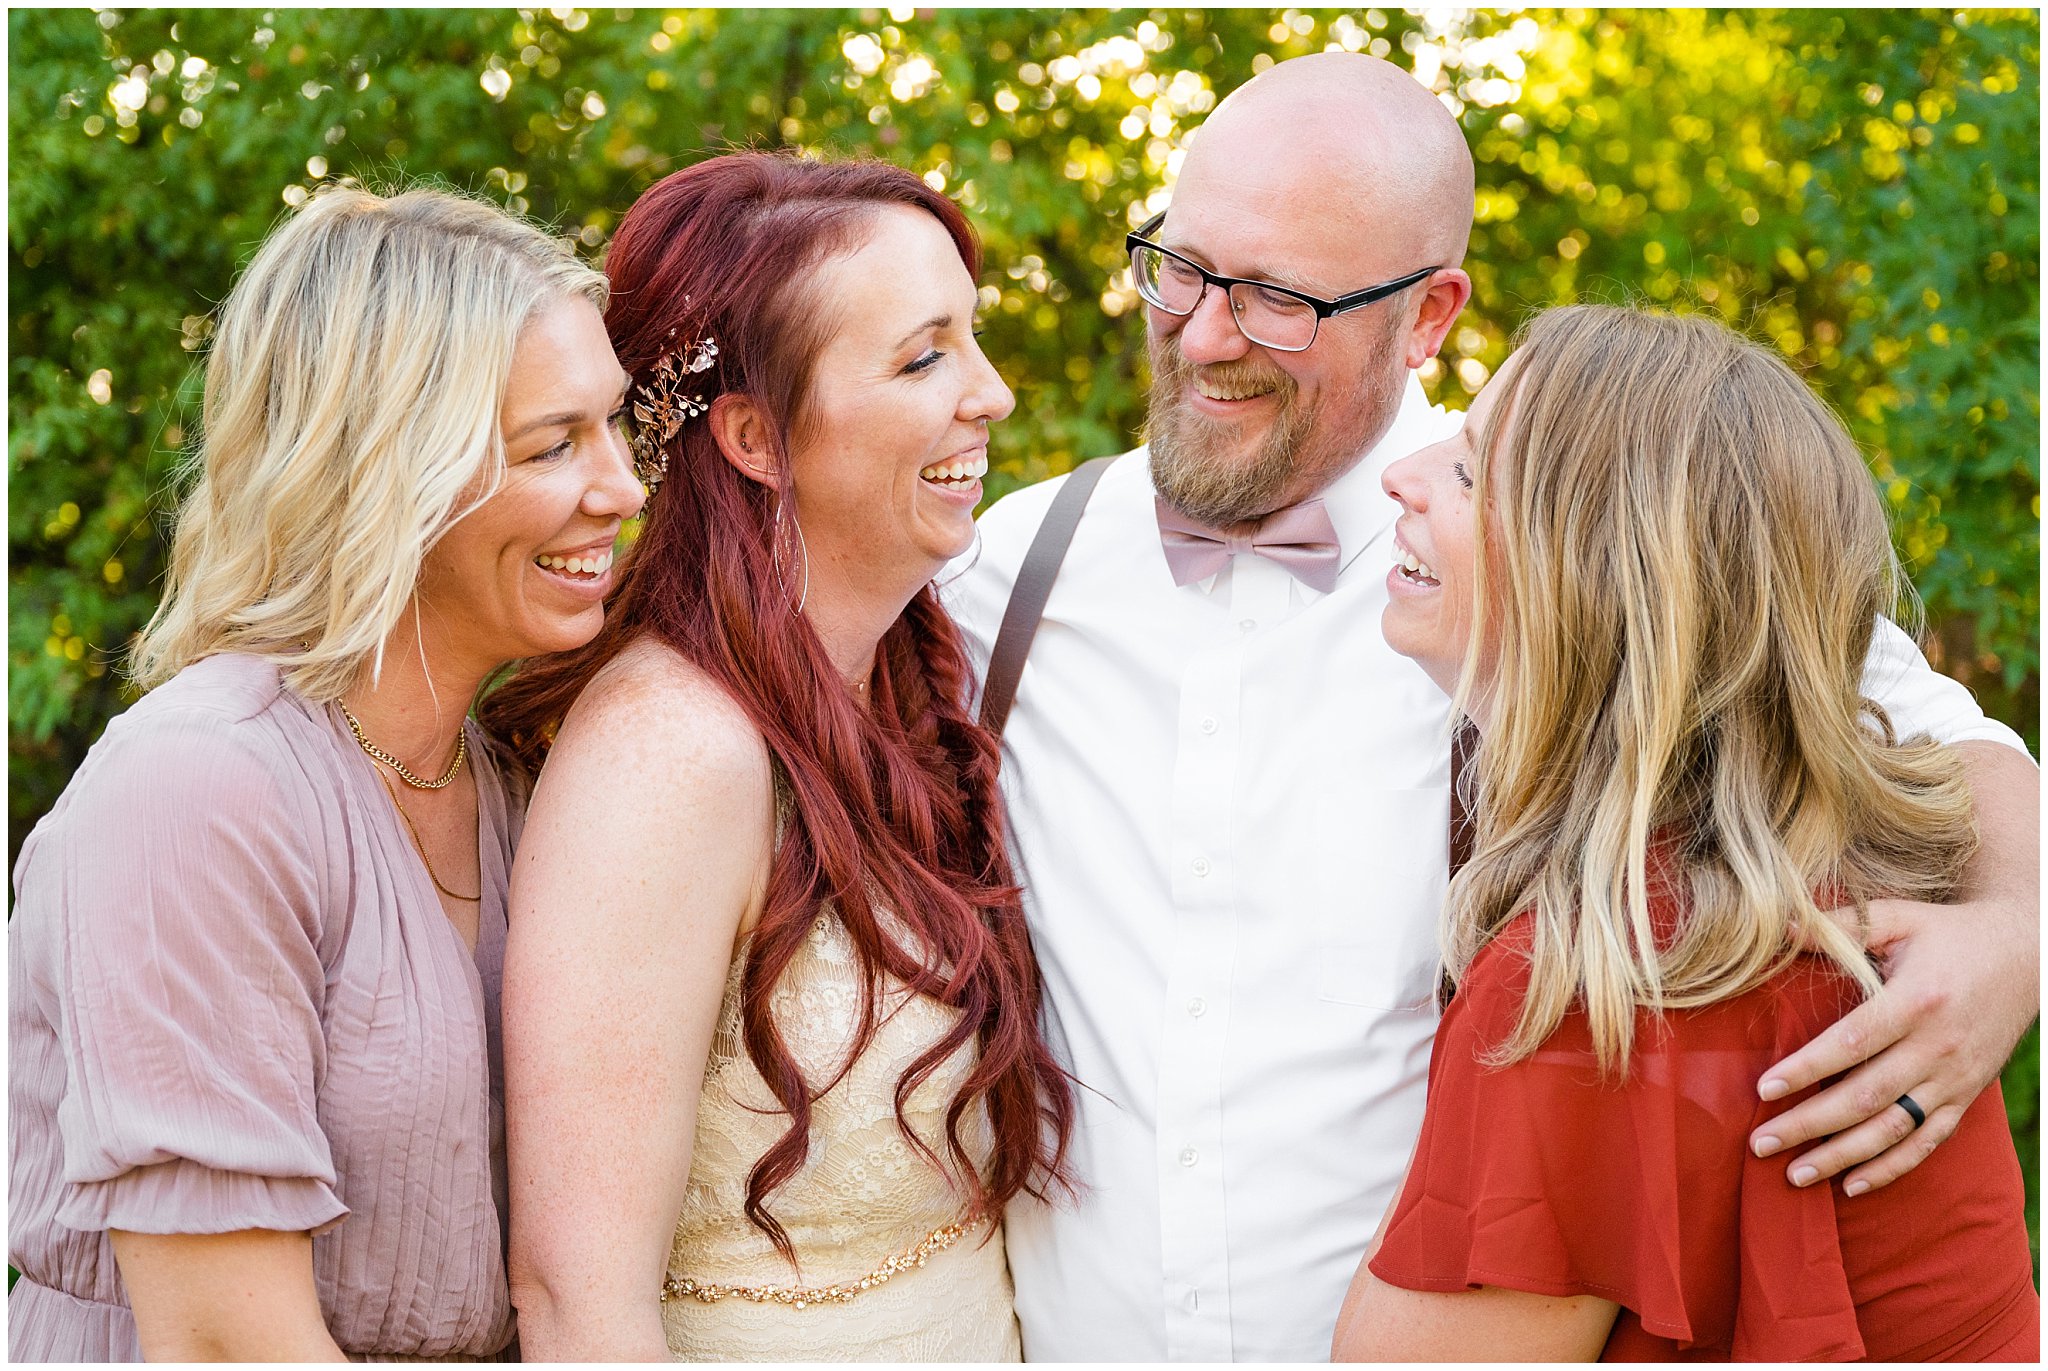 Family portraits at Lions Park in Cache Valley | Logan Utah Outdoor Summer Wedding | Jessie and Dallin Photography